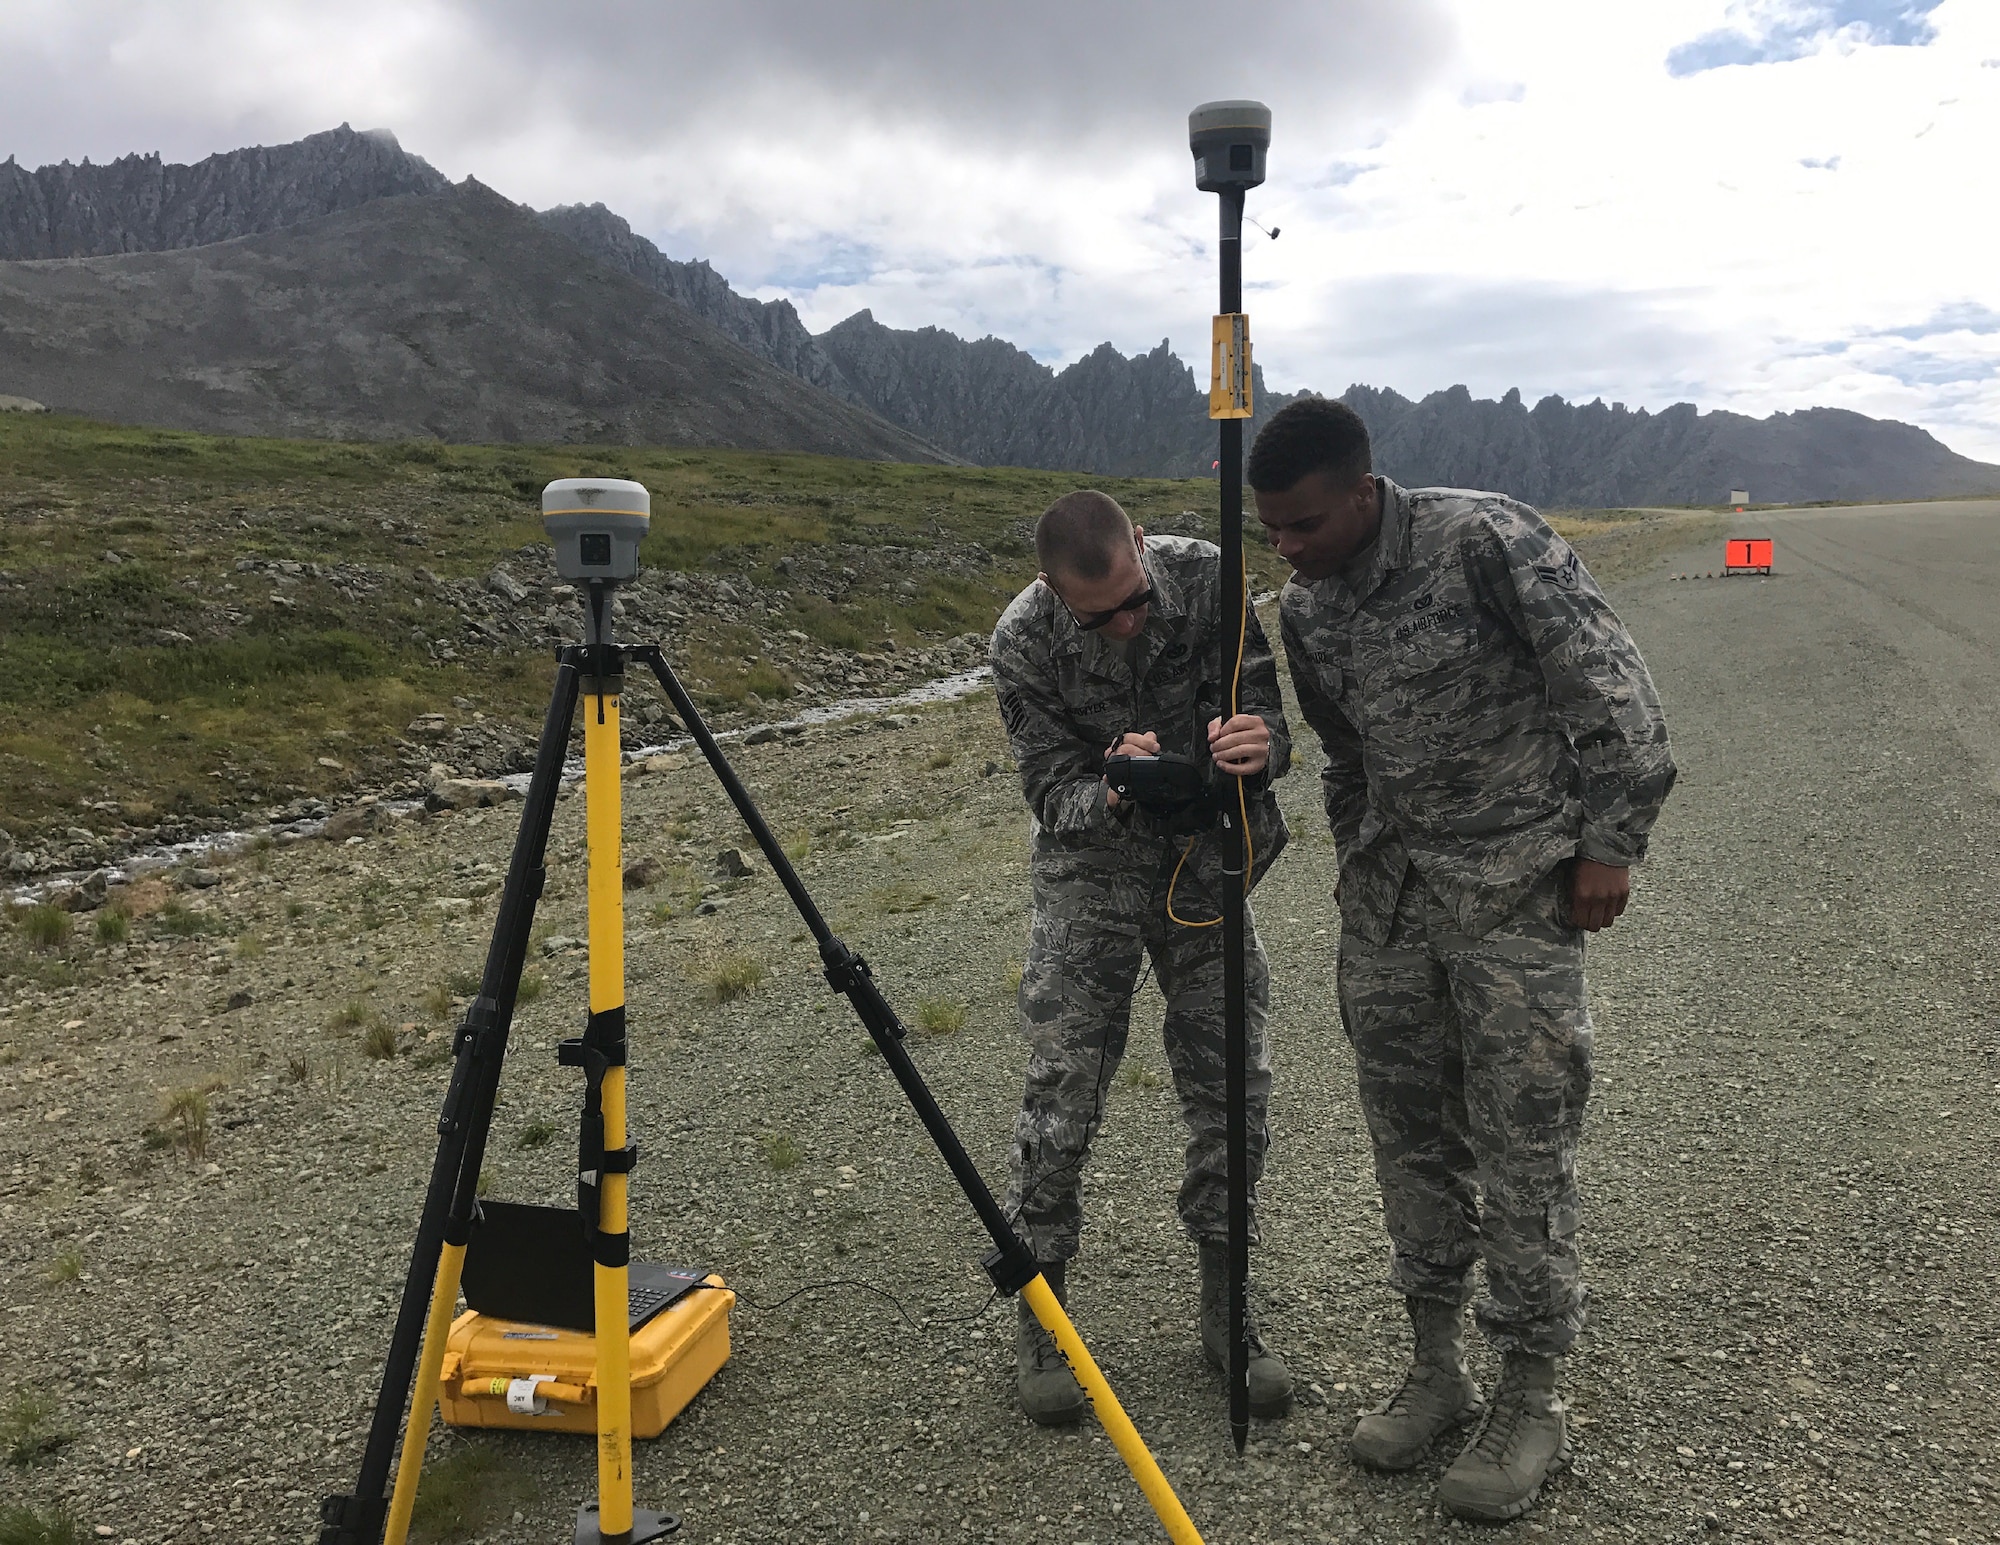 U.S. Air Force Tech. Sgt. James Lawyer, 611th Civil Engineer Squadron airfield planning noncommissioned officer in charge, and Airman 1st Class Shane Leapheart, 673d CES engineer, set up a temporary base station at Cape Newnham, Alaska, August 2017. This procedure locates benchmarks on the site to establish vertical and horizontal coordinates for future projects and property surveying.